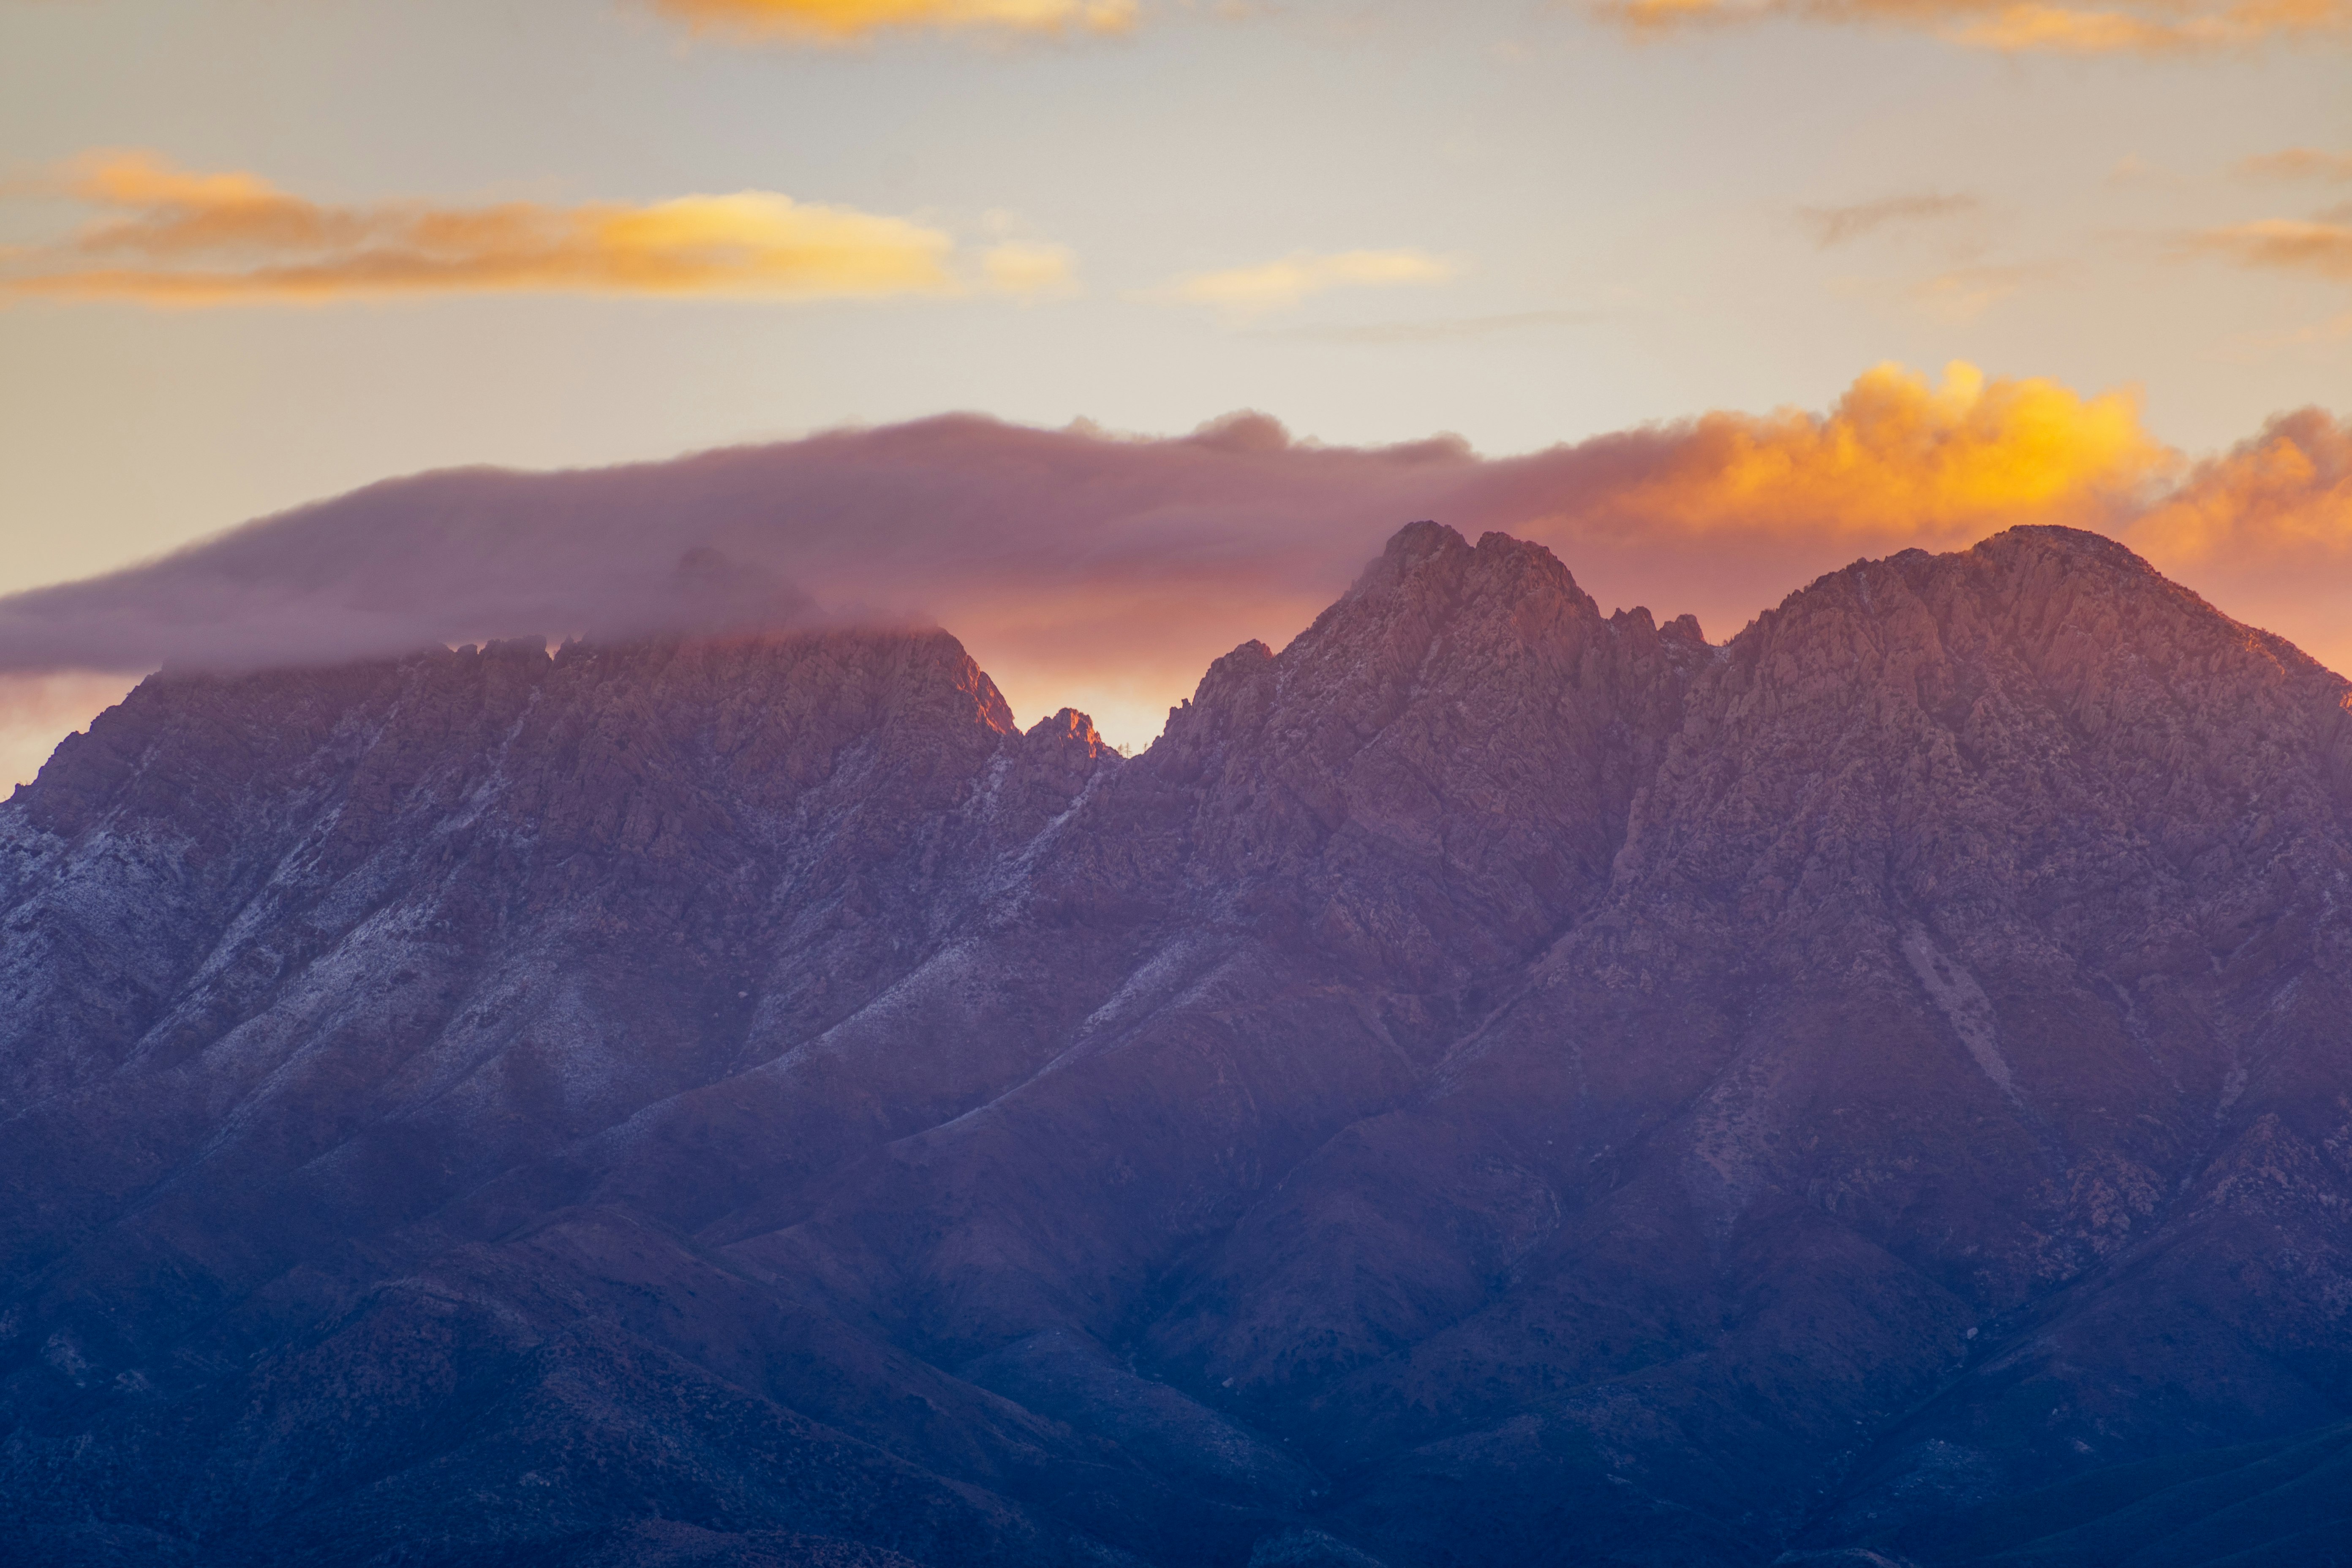 Here's a close-up of Four Peaks located in the Tonto National Forest, Arizona. This is my last landscape photoshoot of 2020. It was an amazing morning, to say the least.